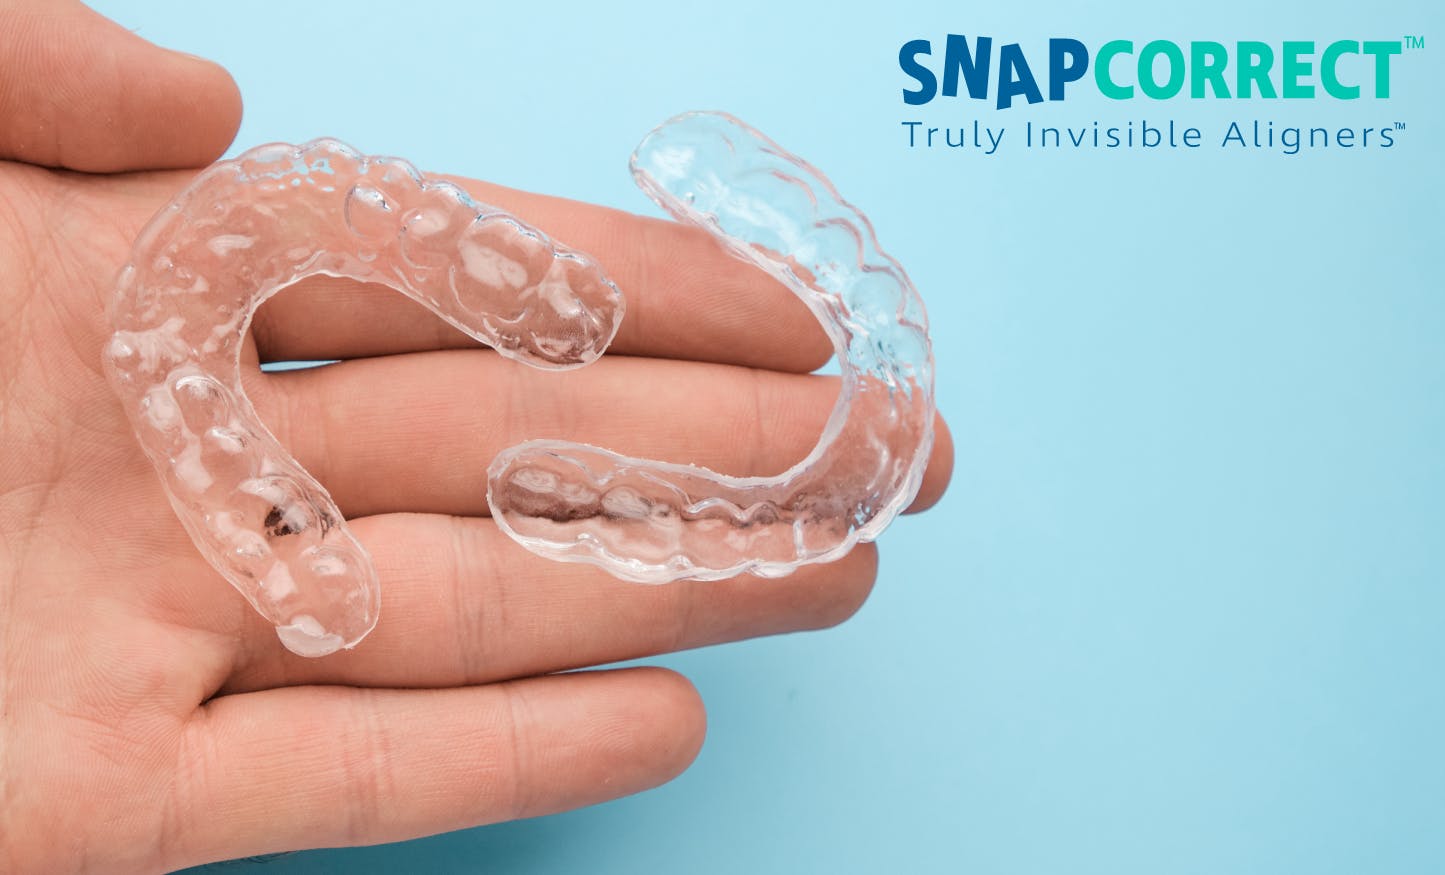 SnapCorrect: Truly Invisible Aligners Review